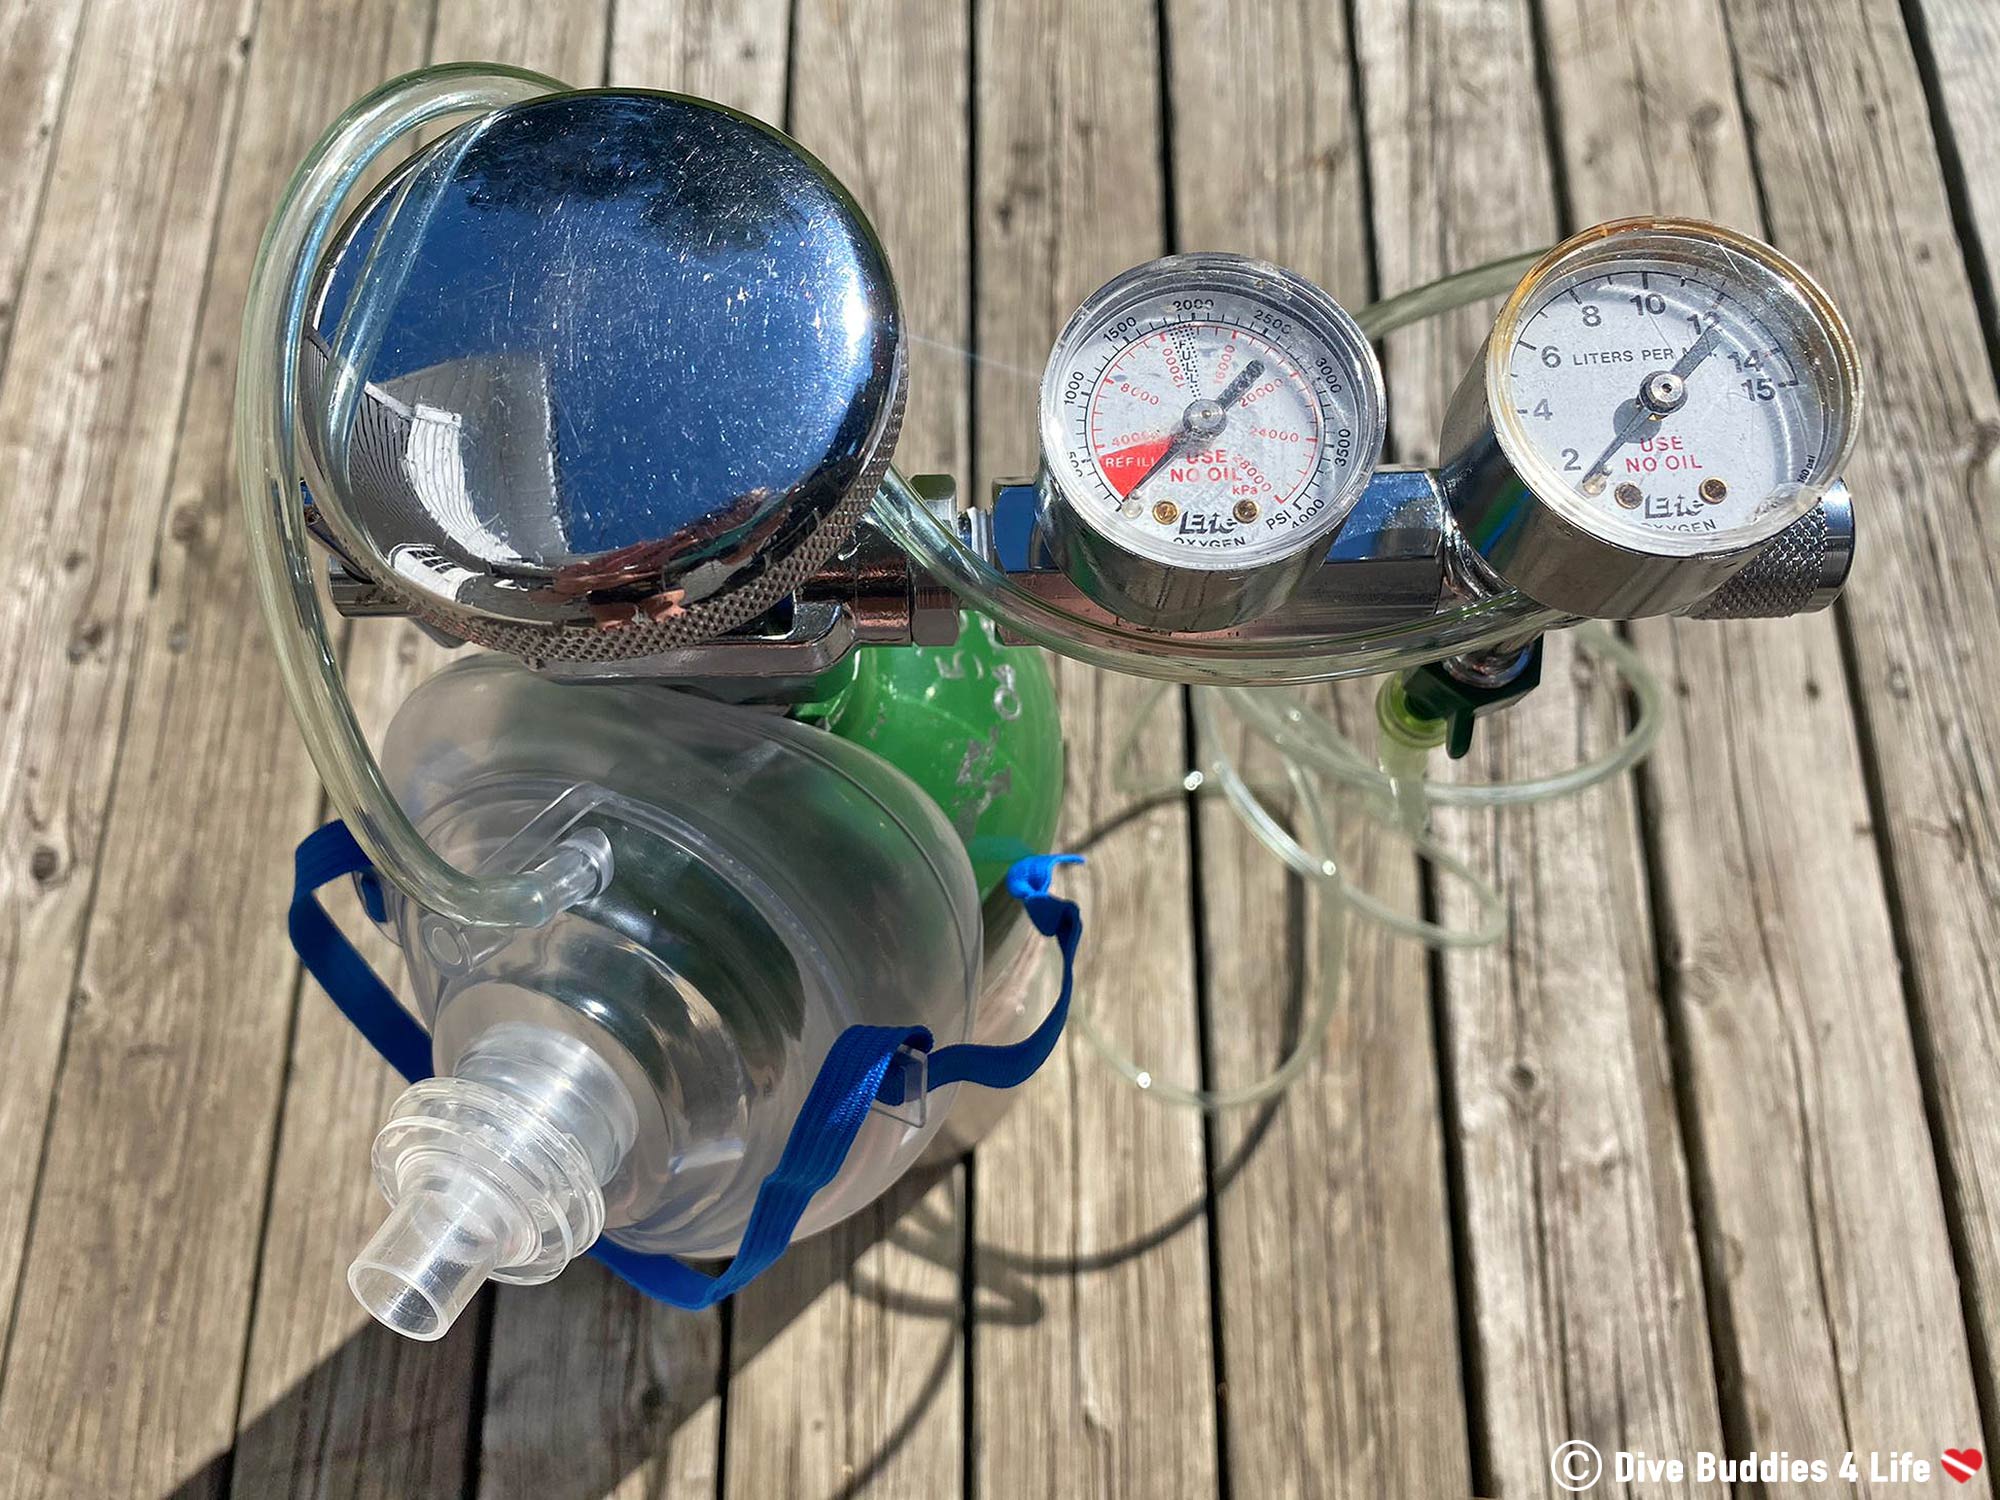 The Valves Of An Emergency Oxygen Tank With A Pocket Mask